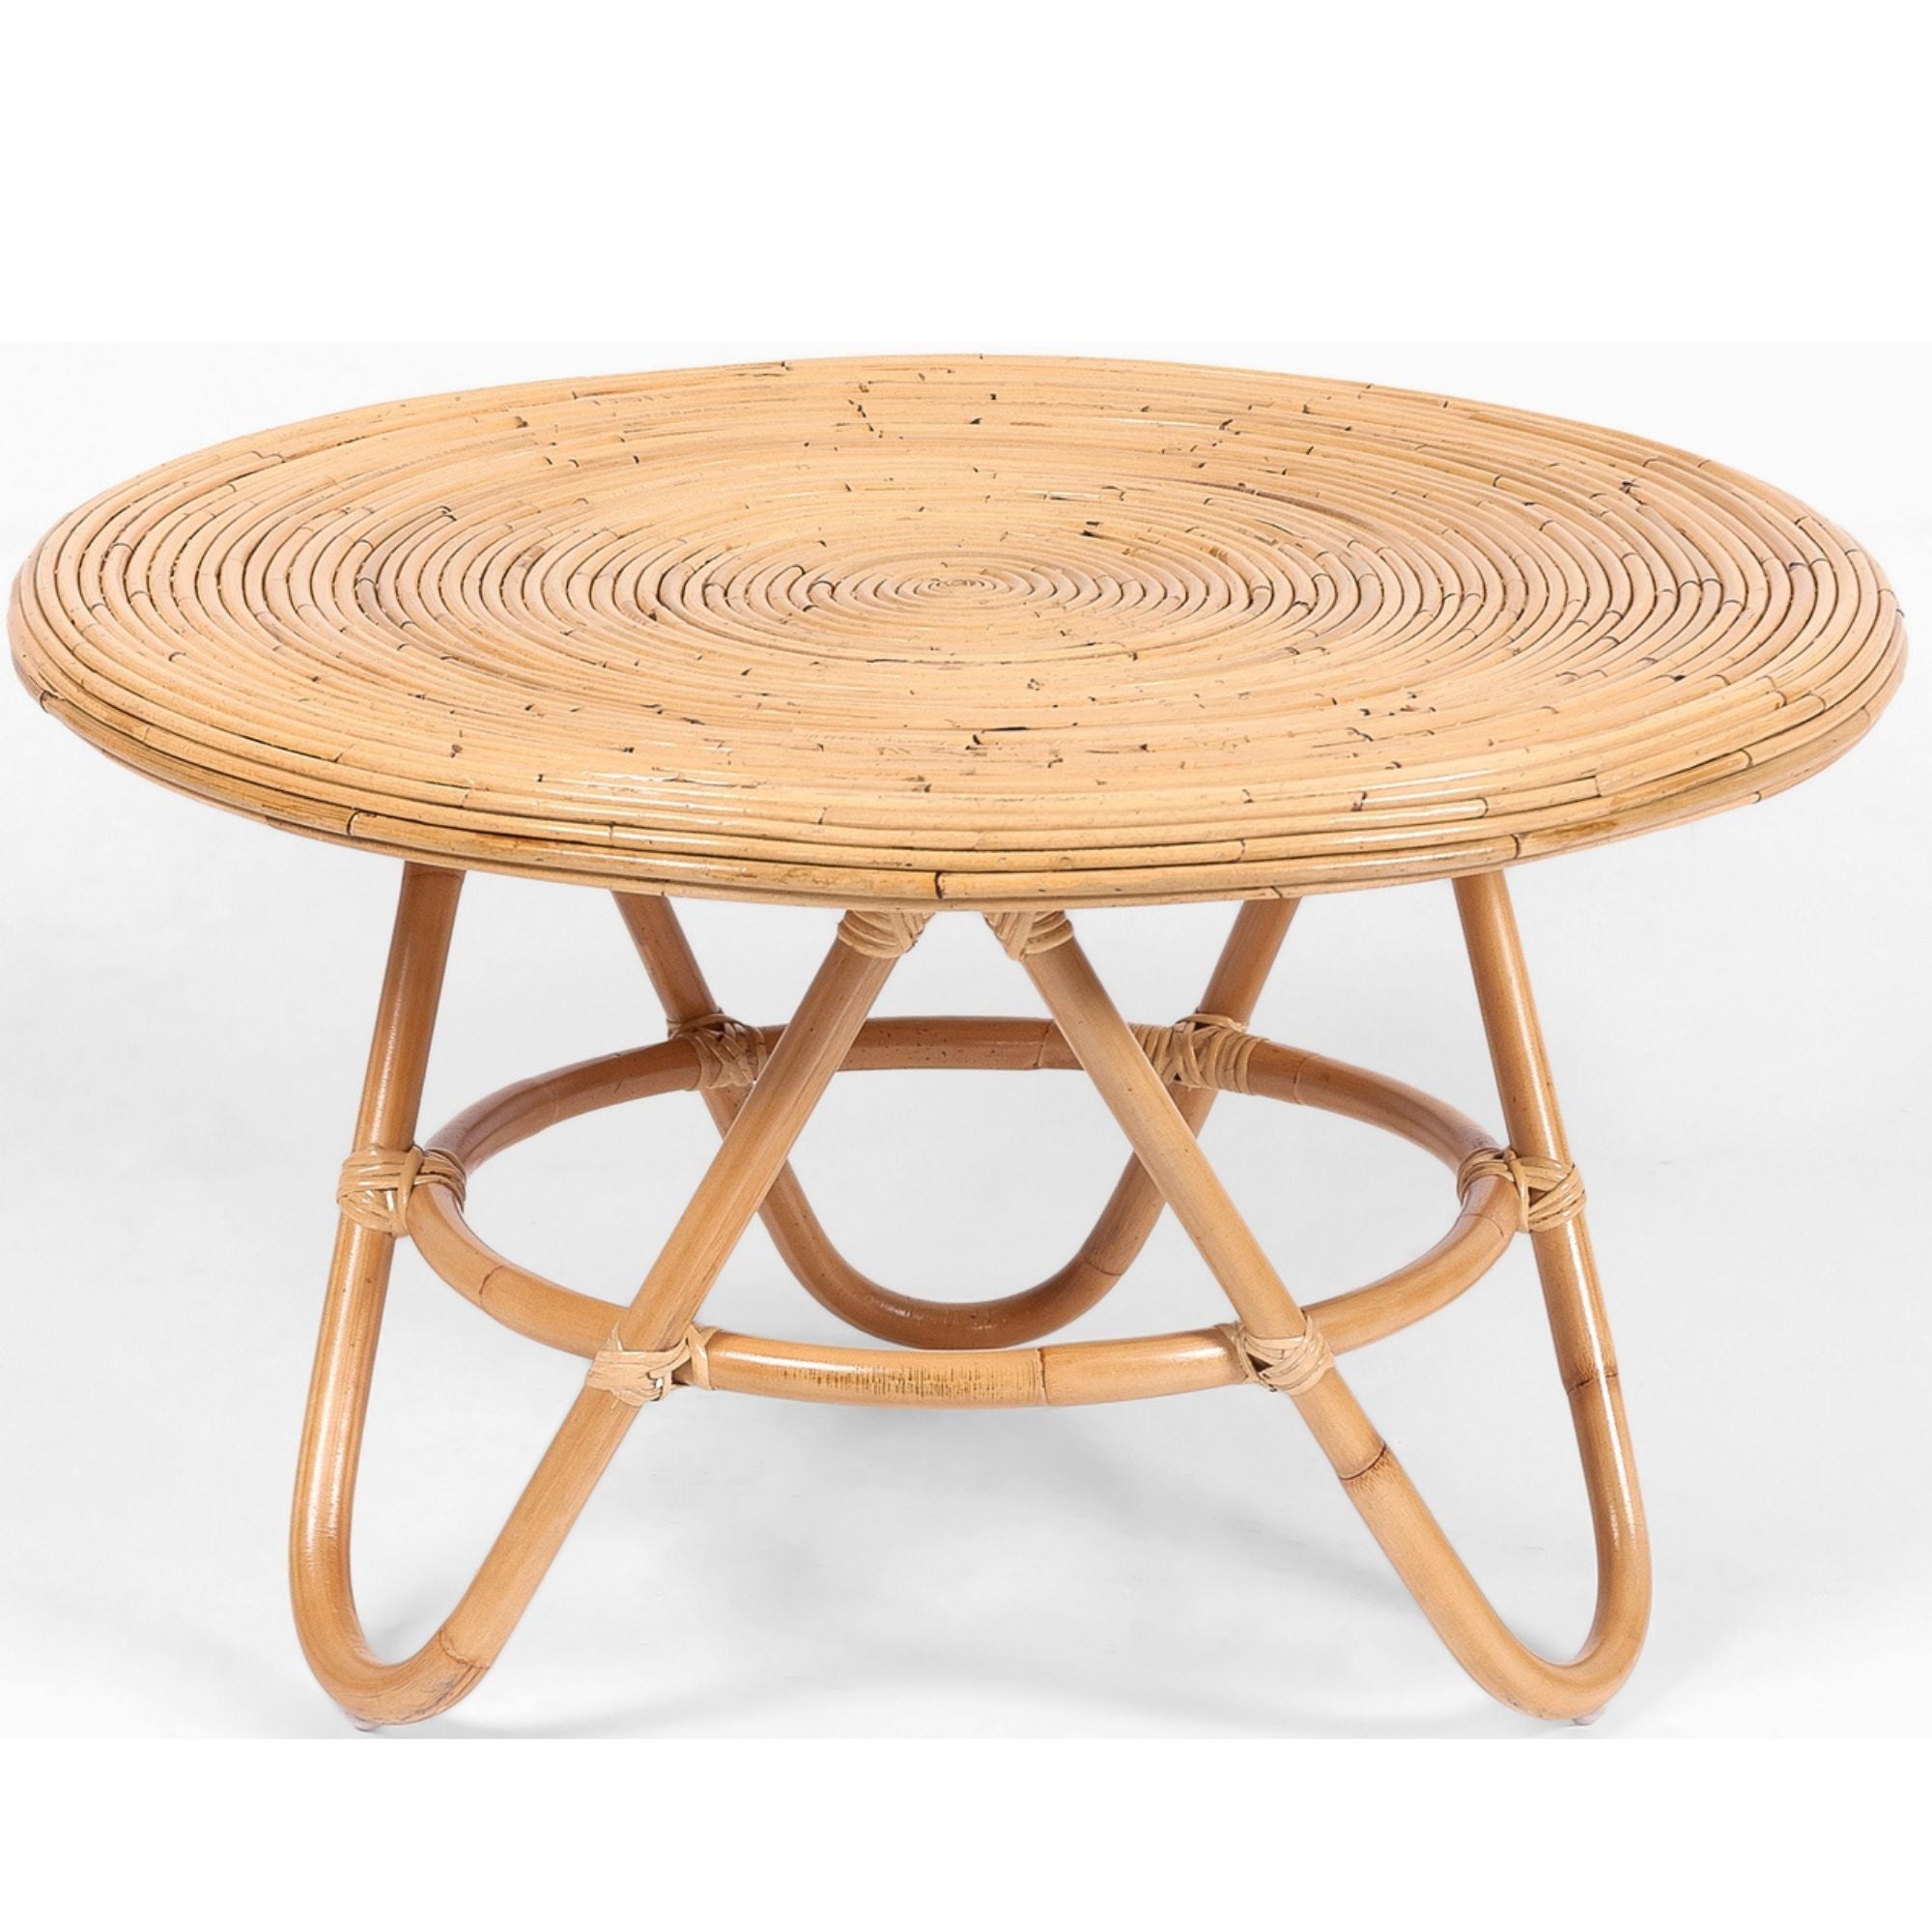 Rattan Round Coffee Table 80Cm - Natural